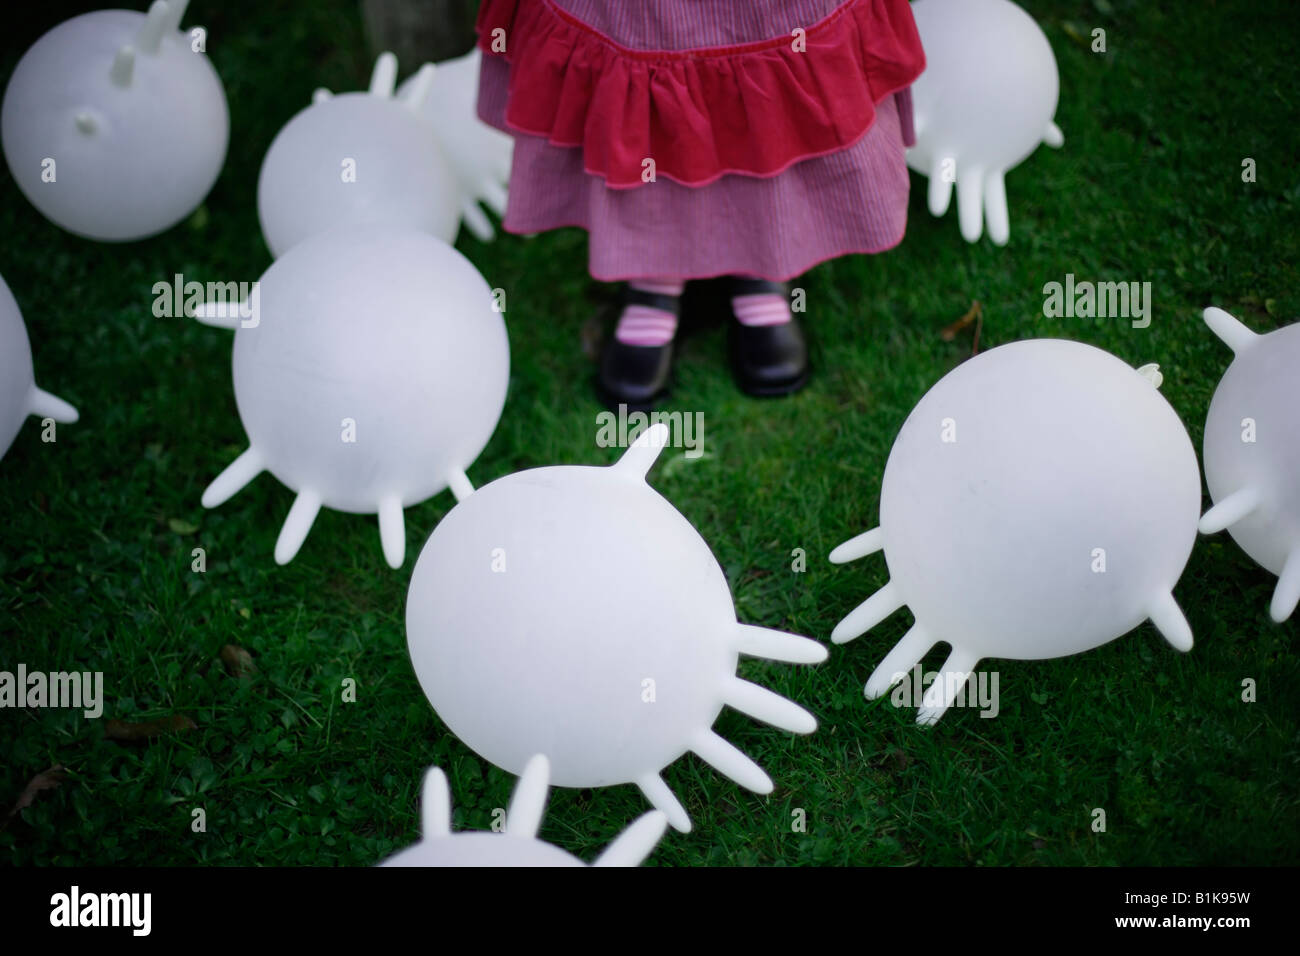 Inflated latex rubber gloves become makeshift balloons kicked around the garden by a four year old girl Stock Photo